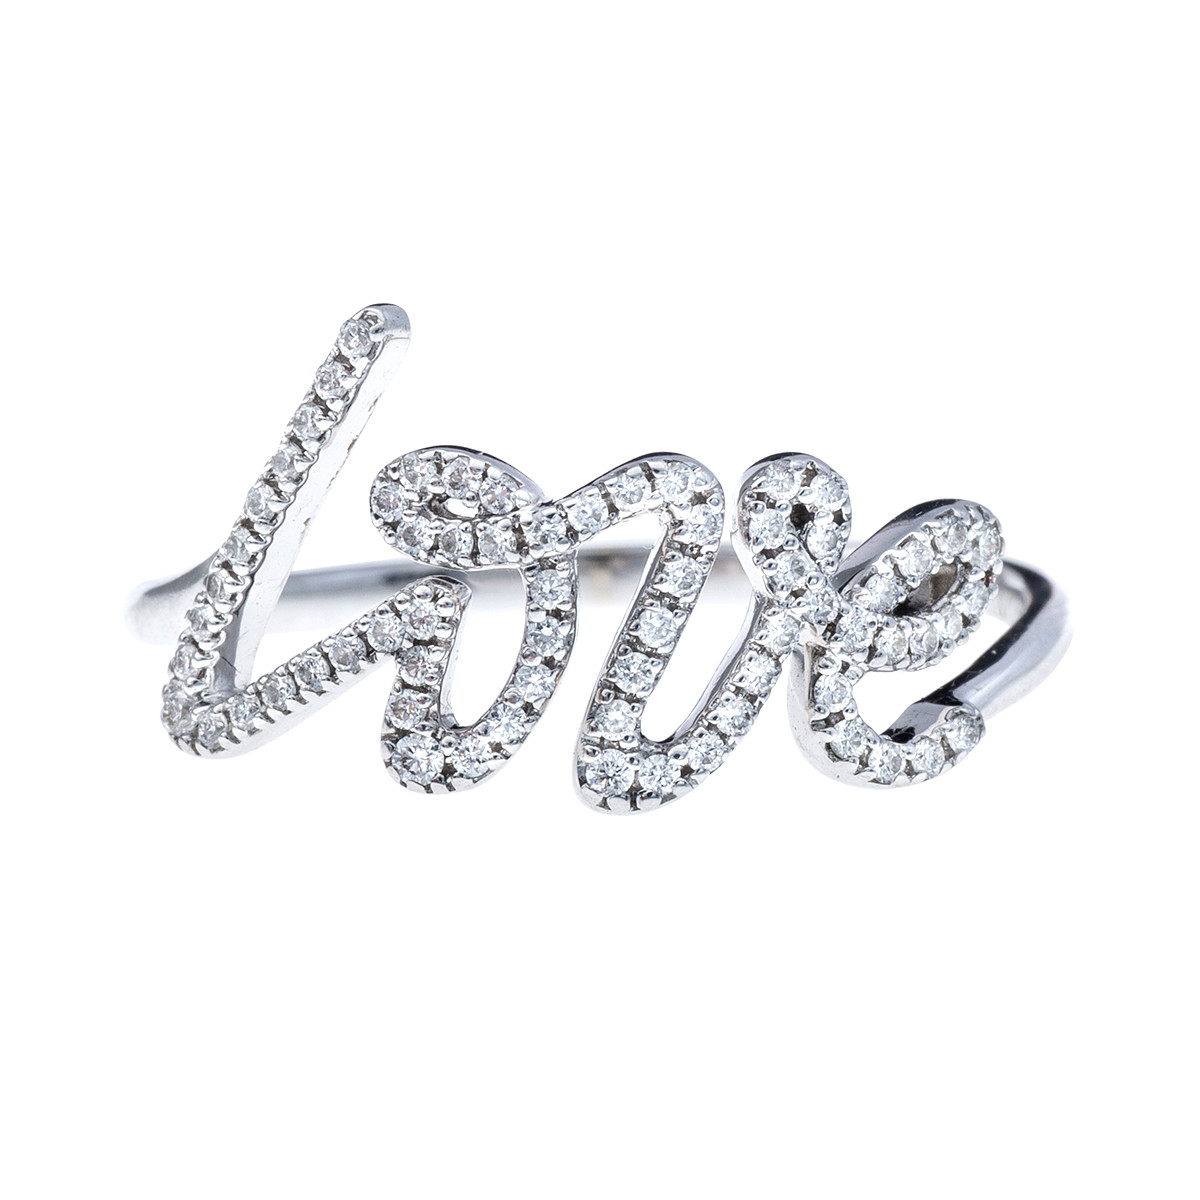 tiffany and co love ring